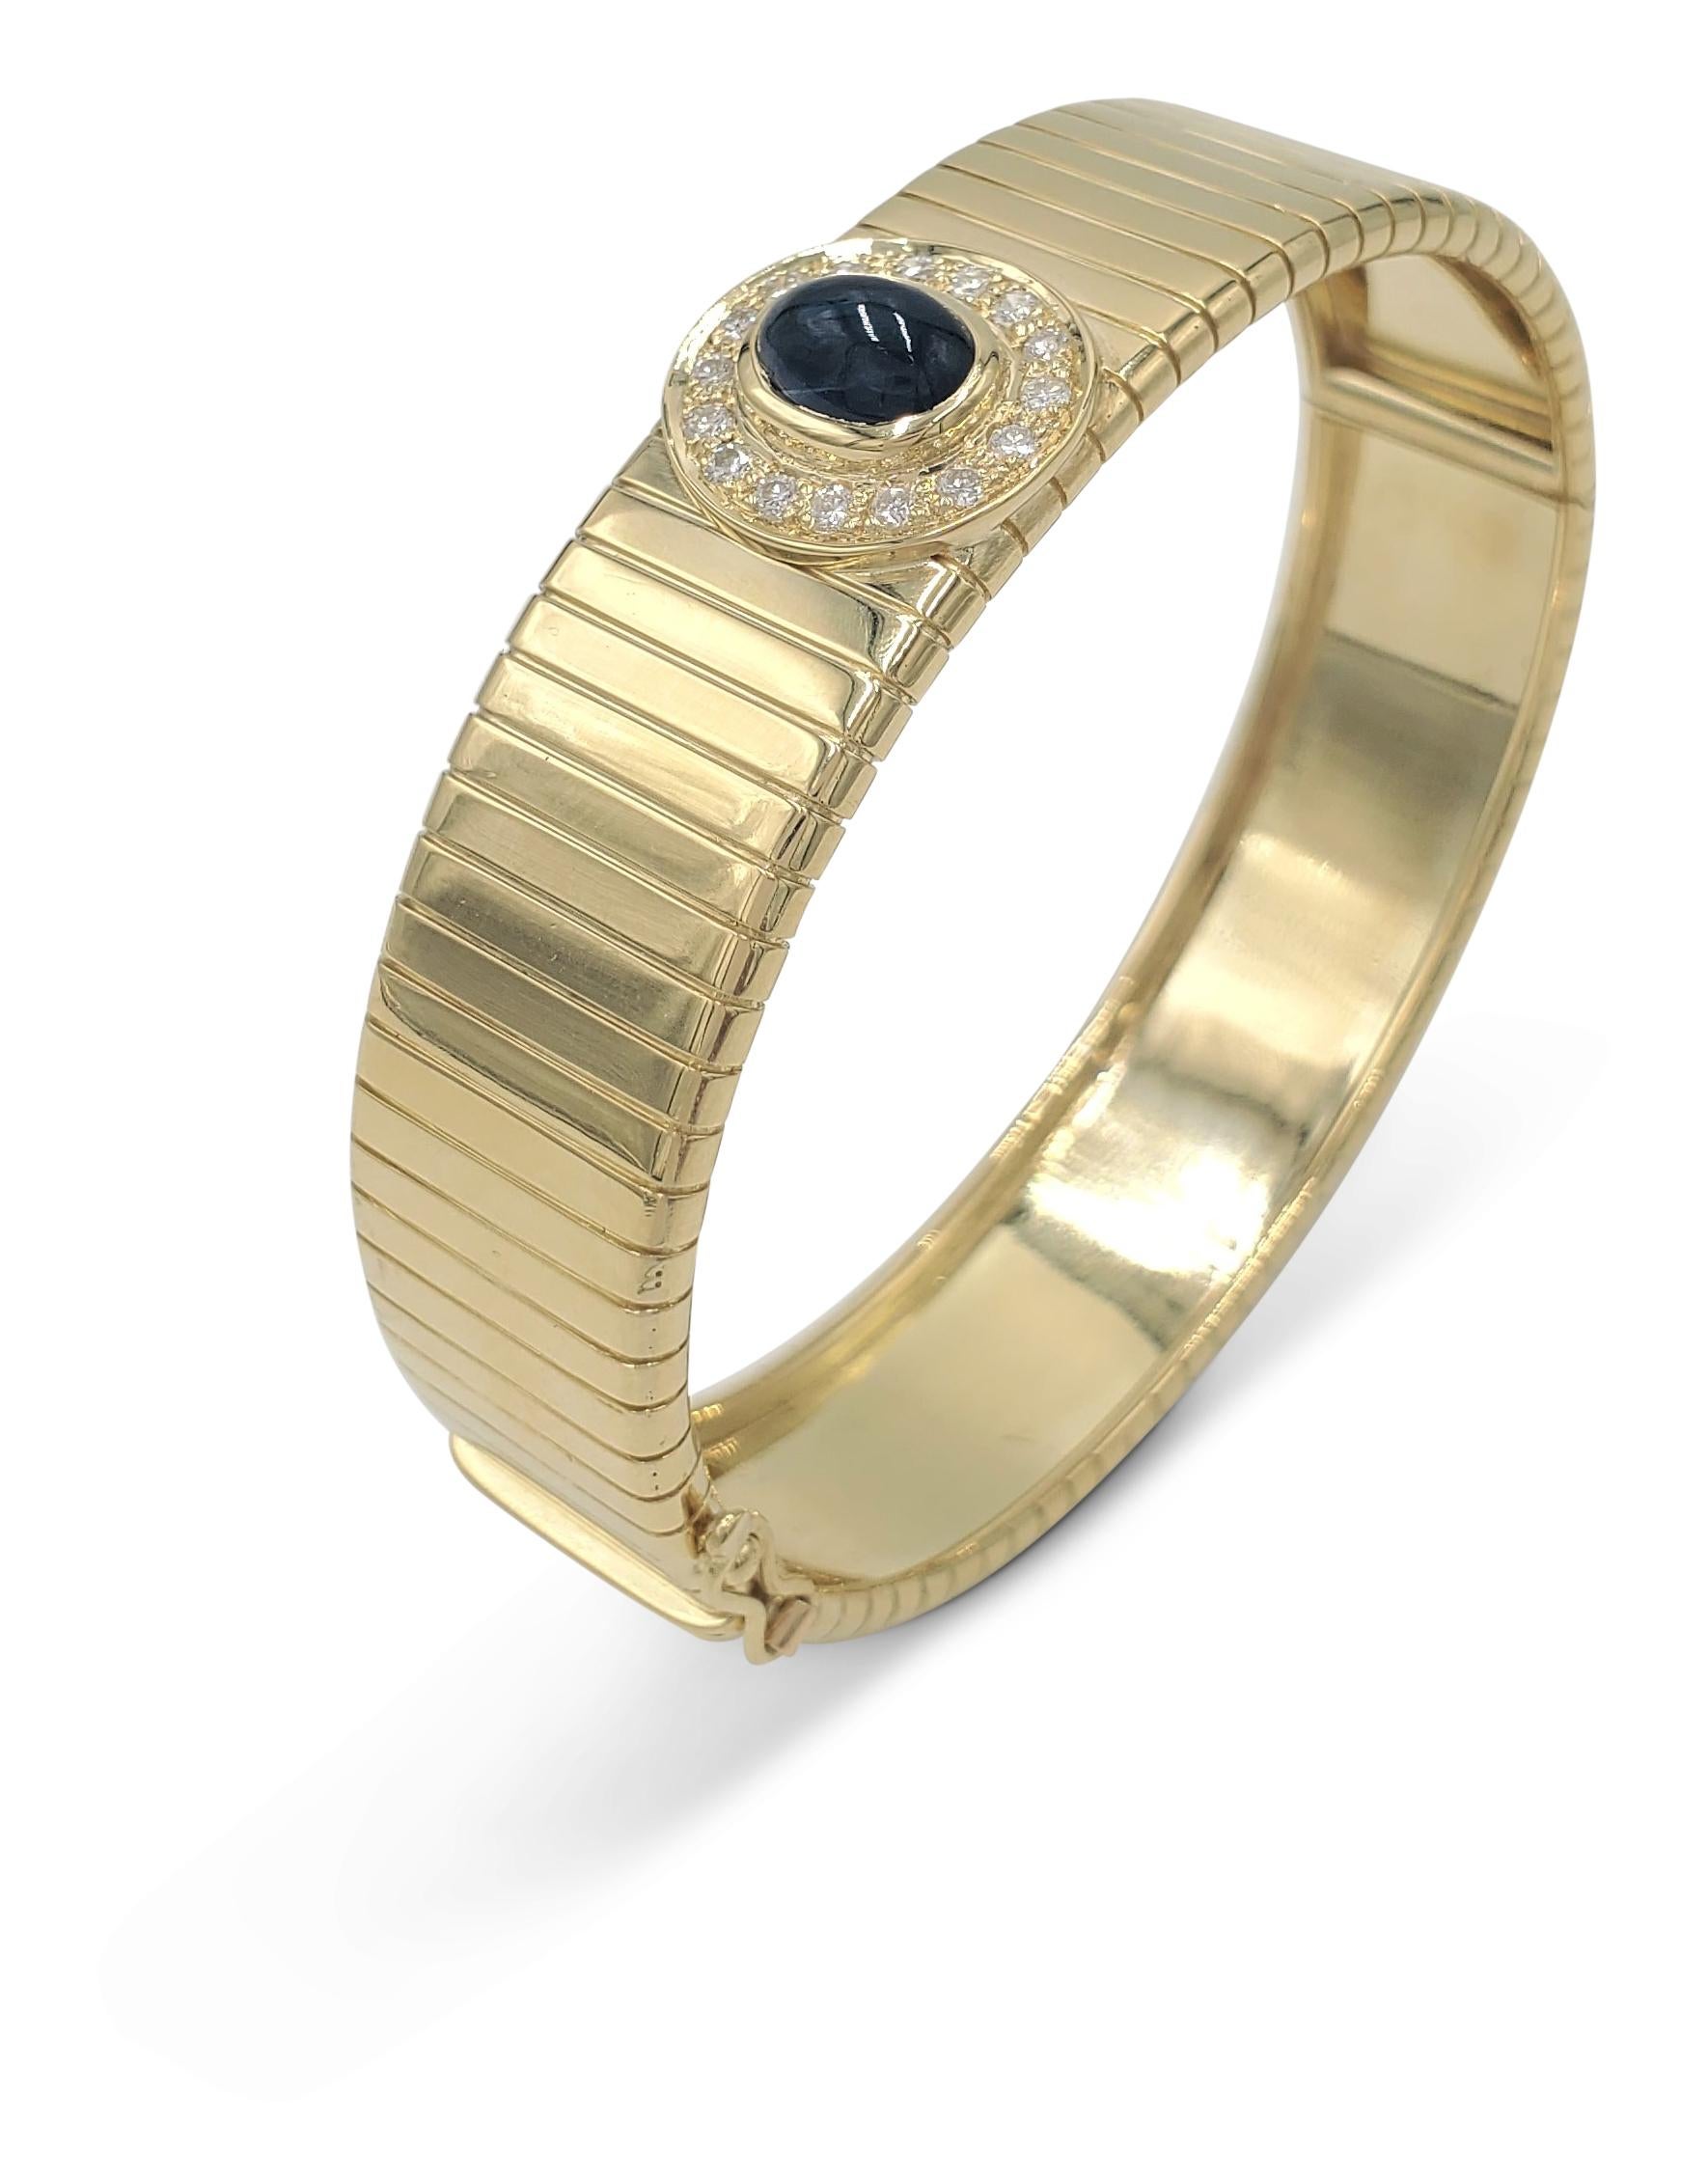 Round Cut Gold Diamond and Sapphire Bangle, Signed Soler Cabot, Faberge